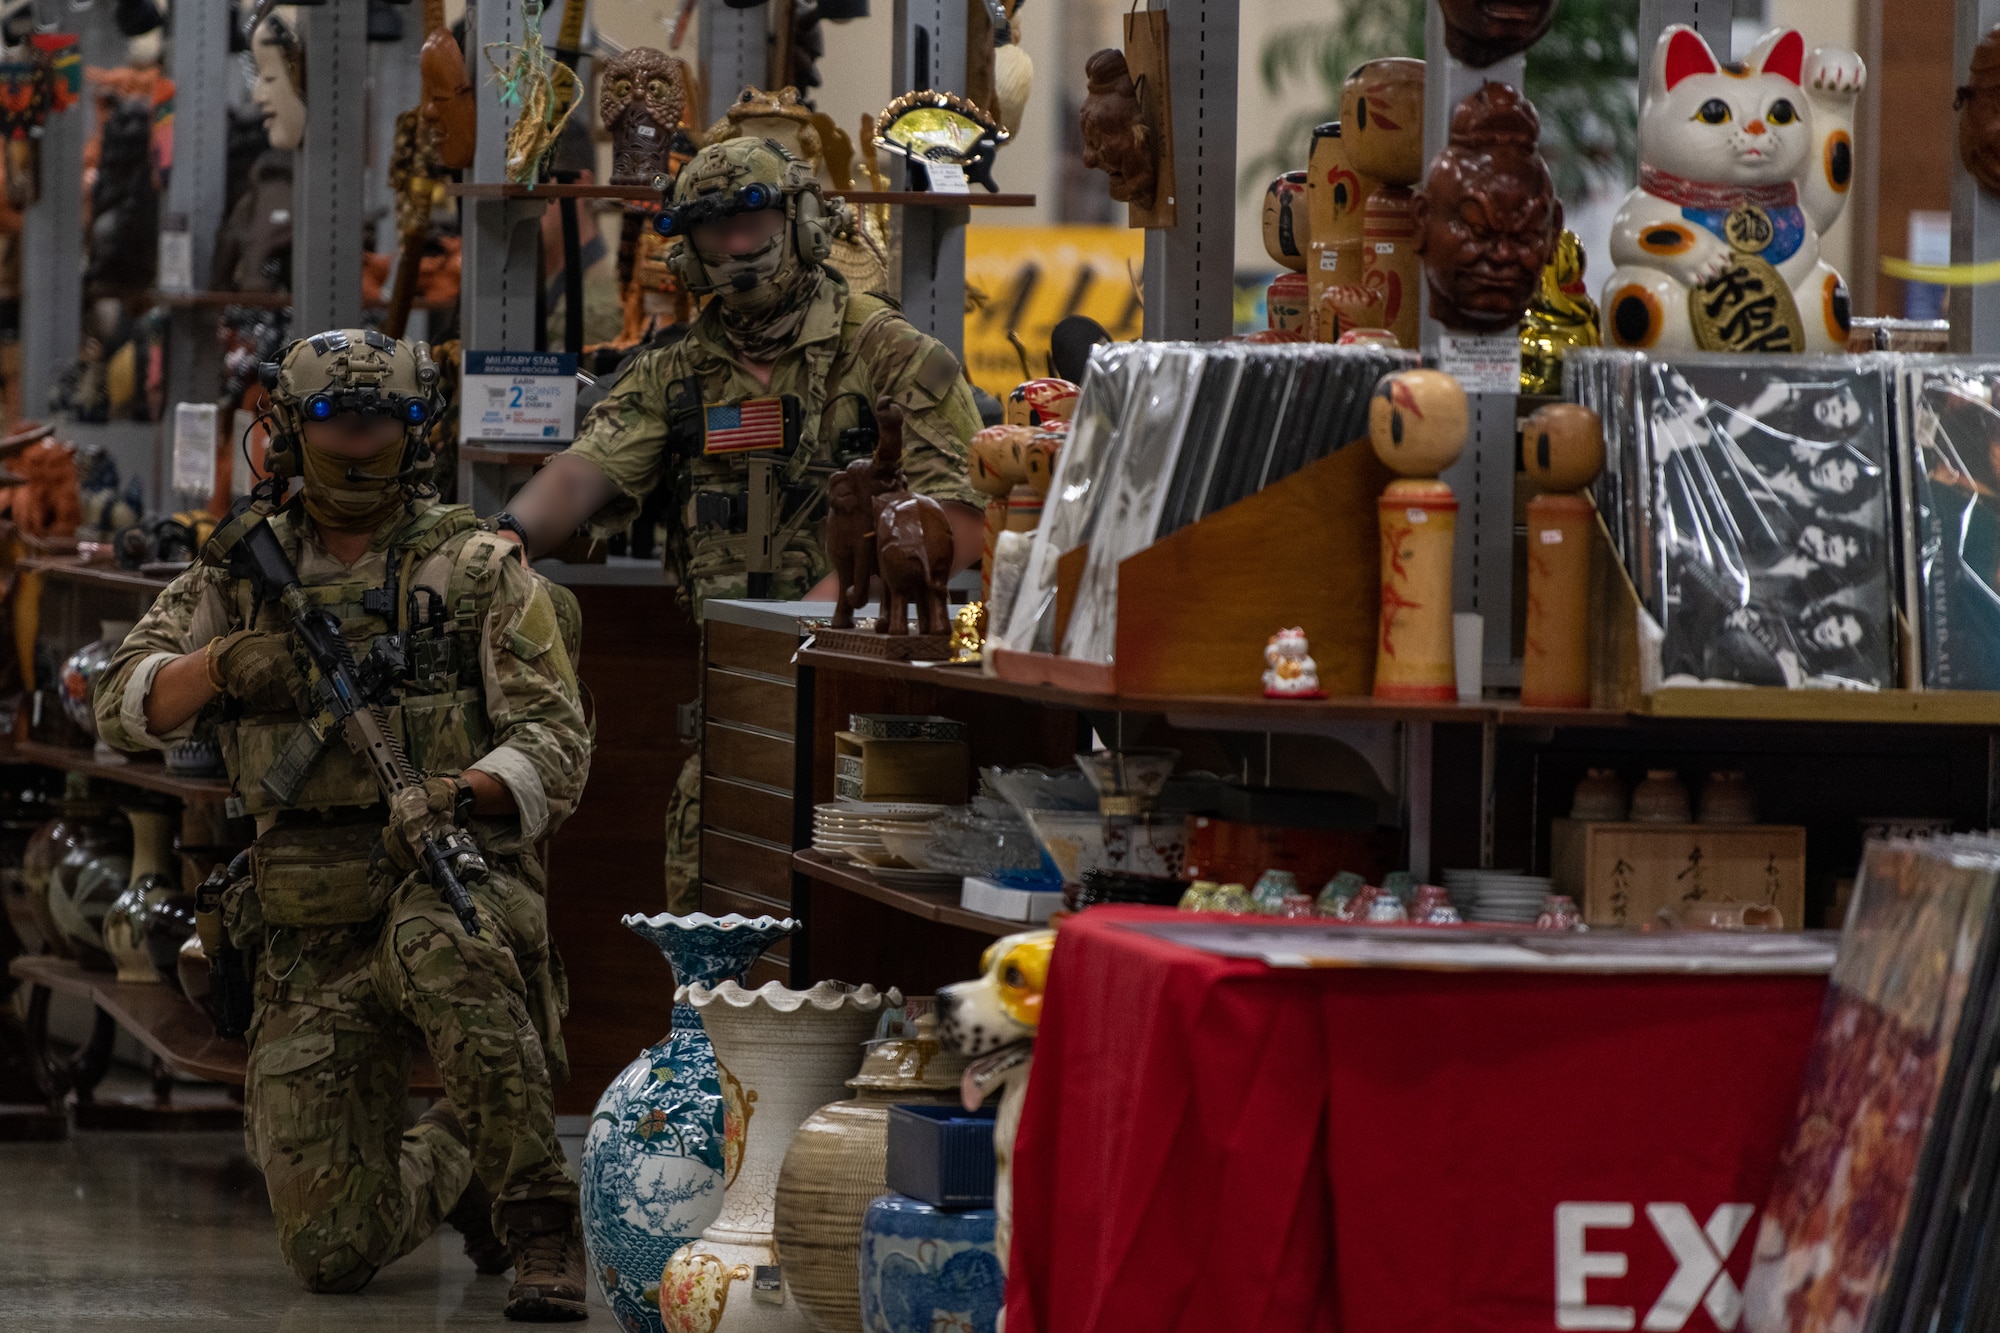 Two U.S. Army Green Berets take cover by a shop stand.